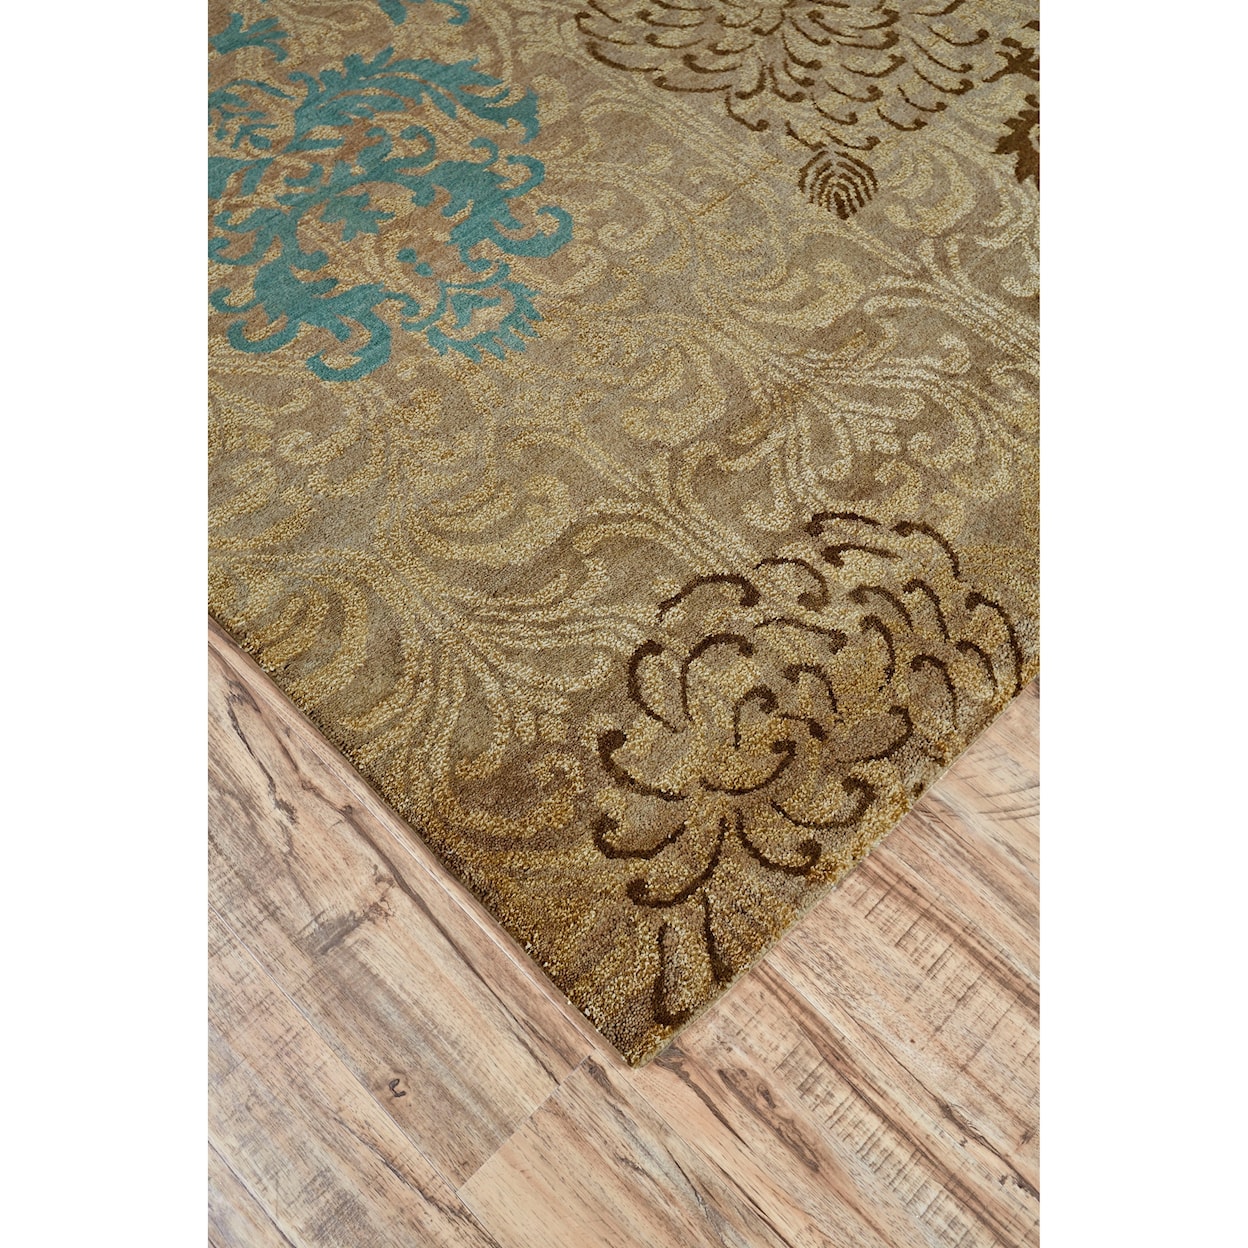 Feizy Rugs Qing Camel 9'-6" x 13'-6" Area Rug